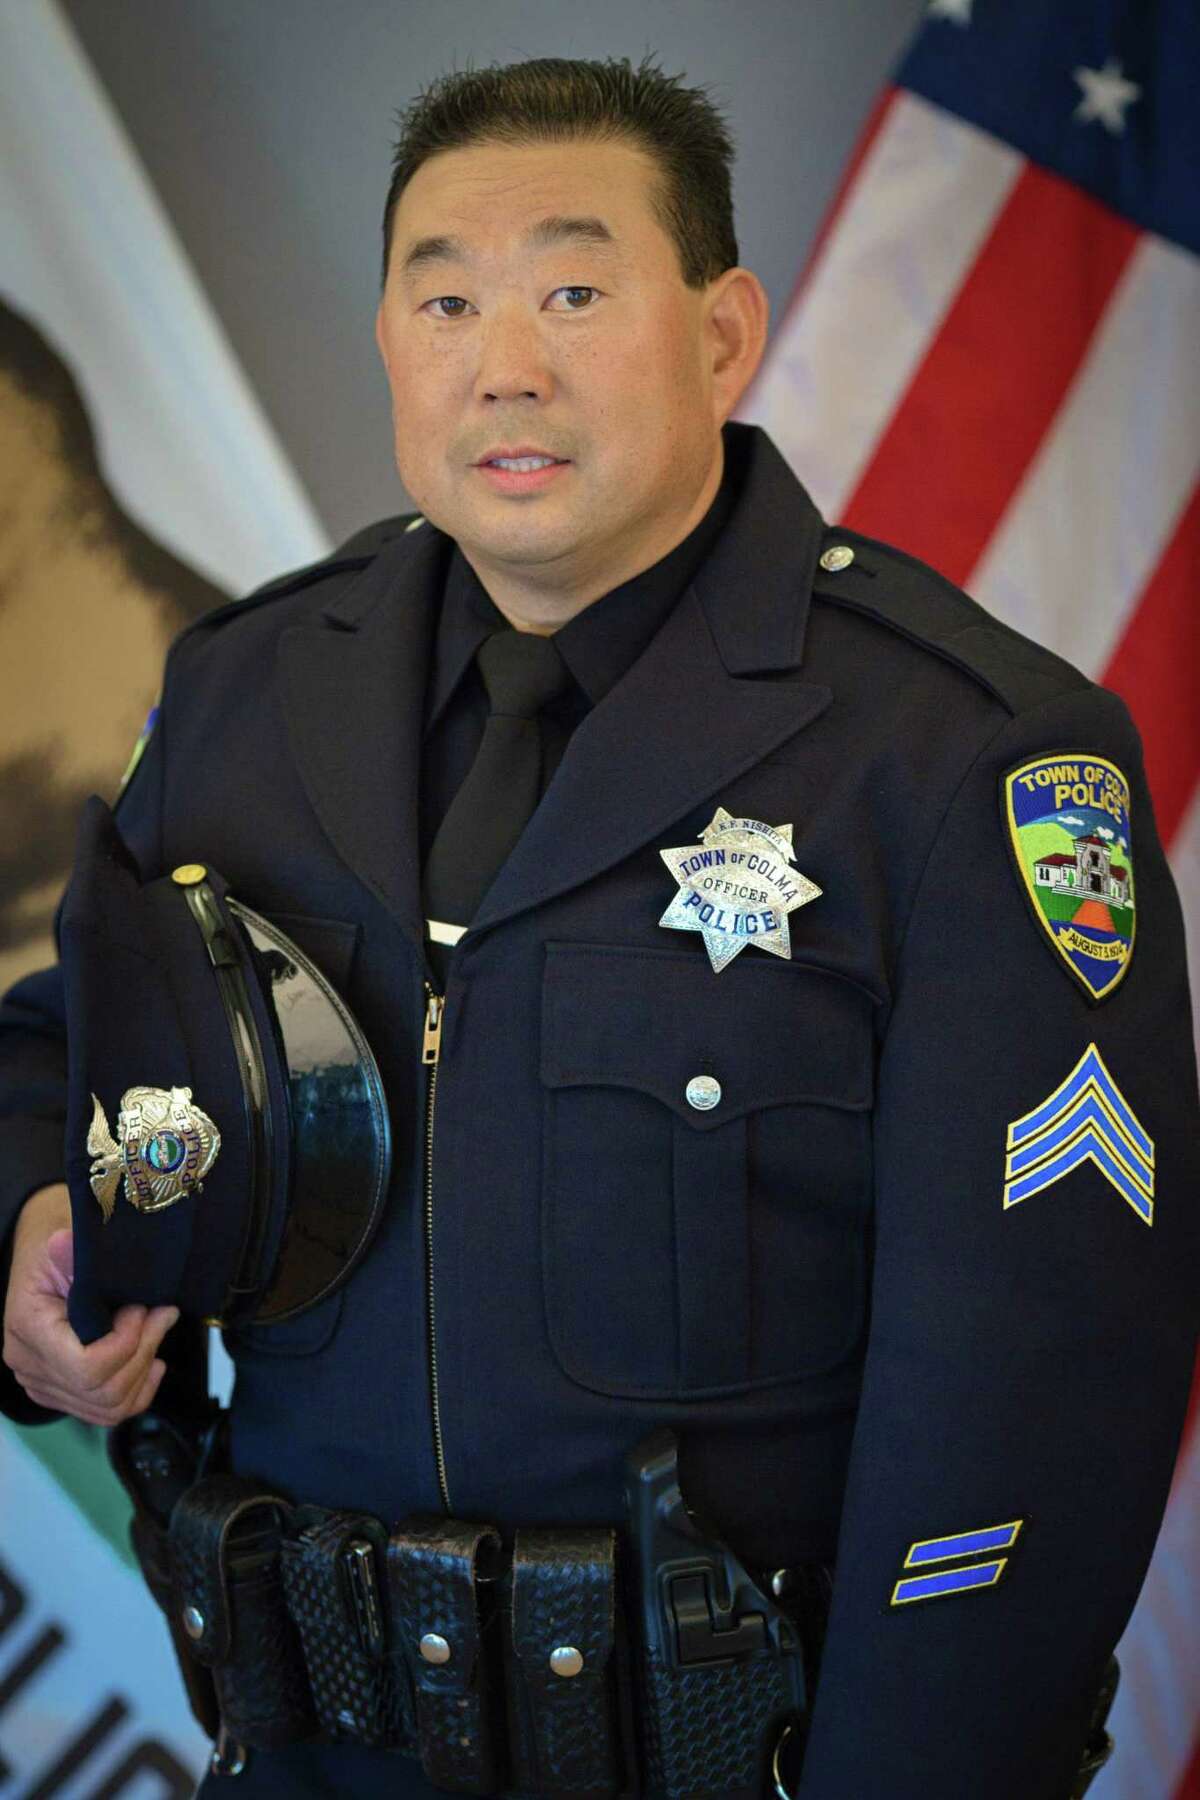 Retired Colma Police Sergeant Kevin Nishita was fatally shot in November while trying to protect a KRON-TV reporter during a robbery in Oakland. Oakland police said Monday they had recovered a vehicle matching the description of the one used in the shooting.